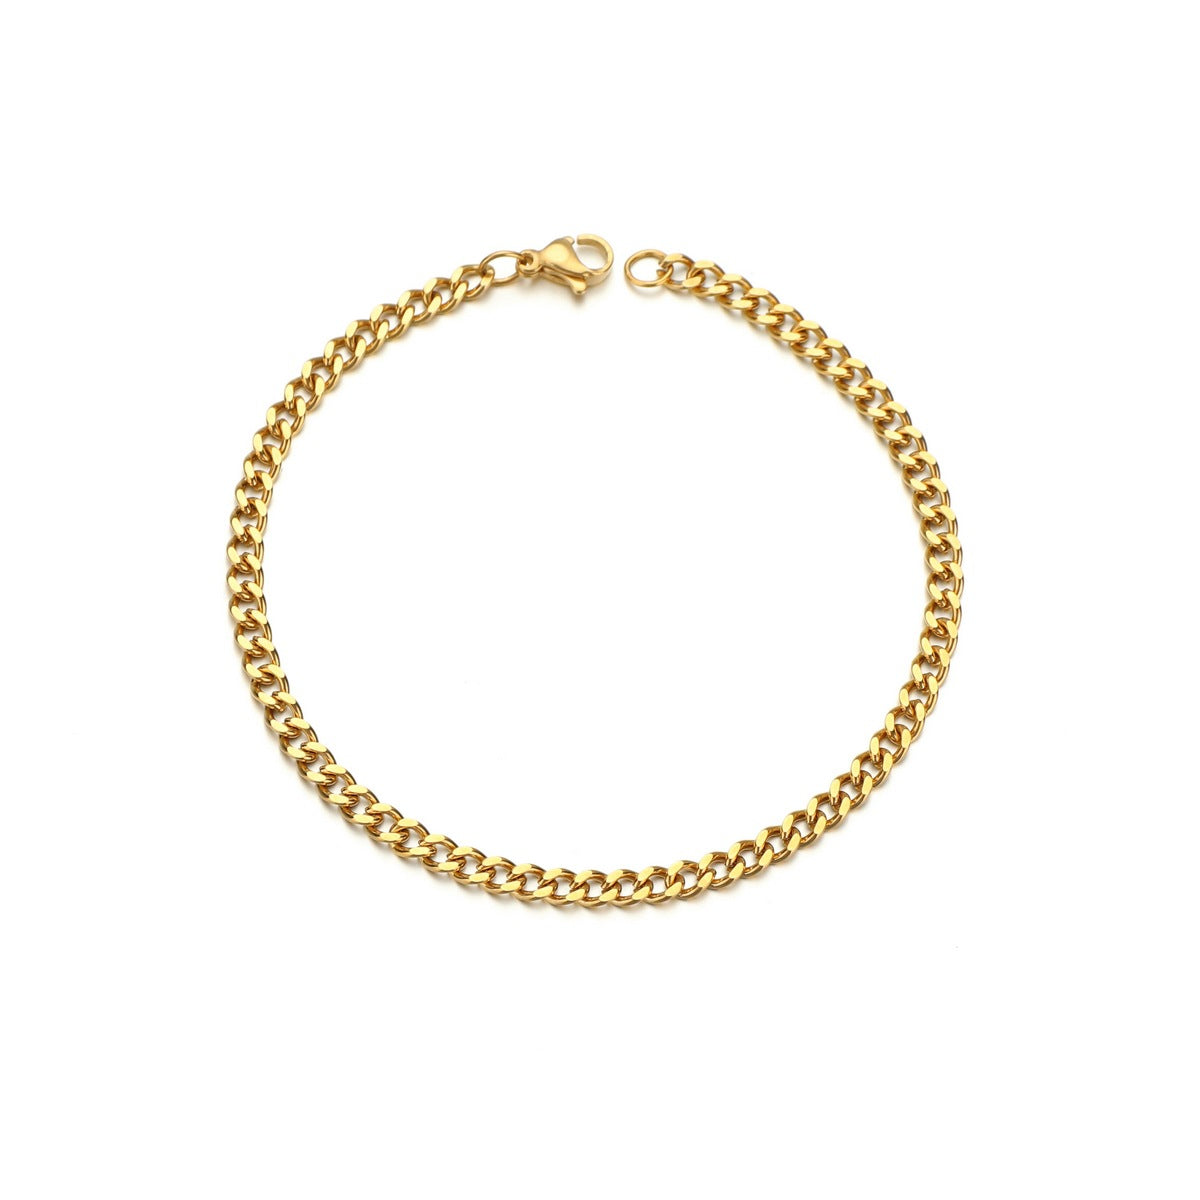 Cross-Border Yiwu Supply A Variety Of Sizes Stainless Steel NK Chain Bracelet Black Gold Steel Color Men's Simple Chain